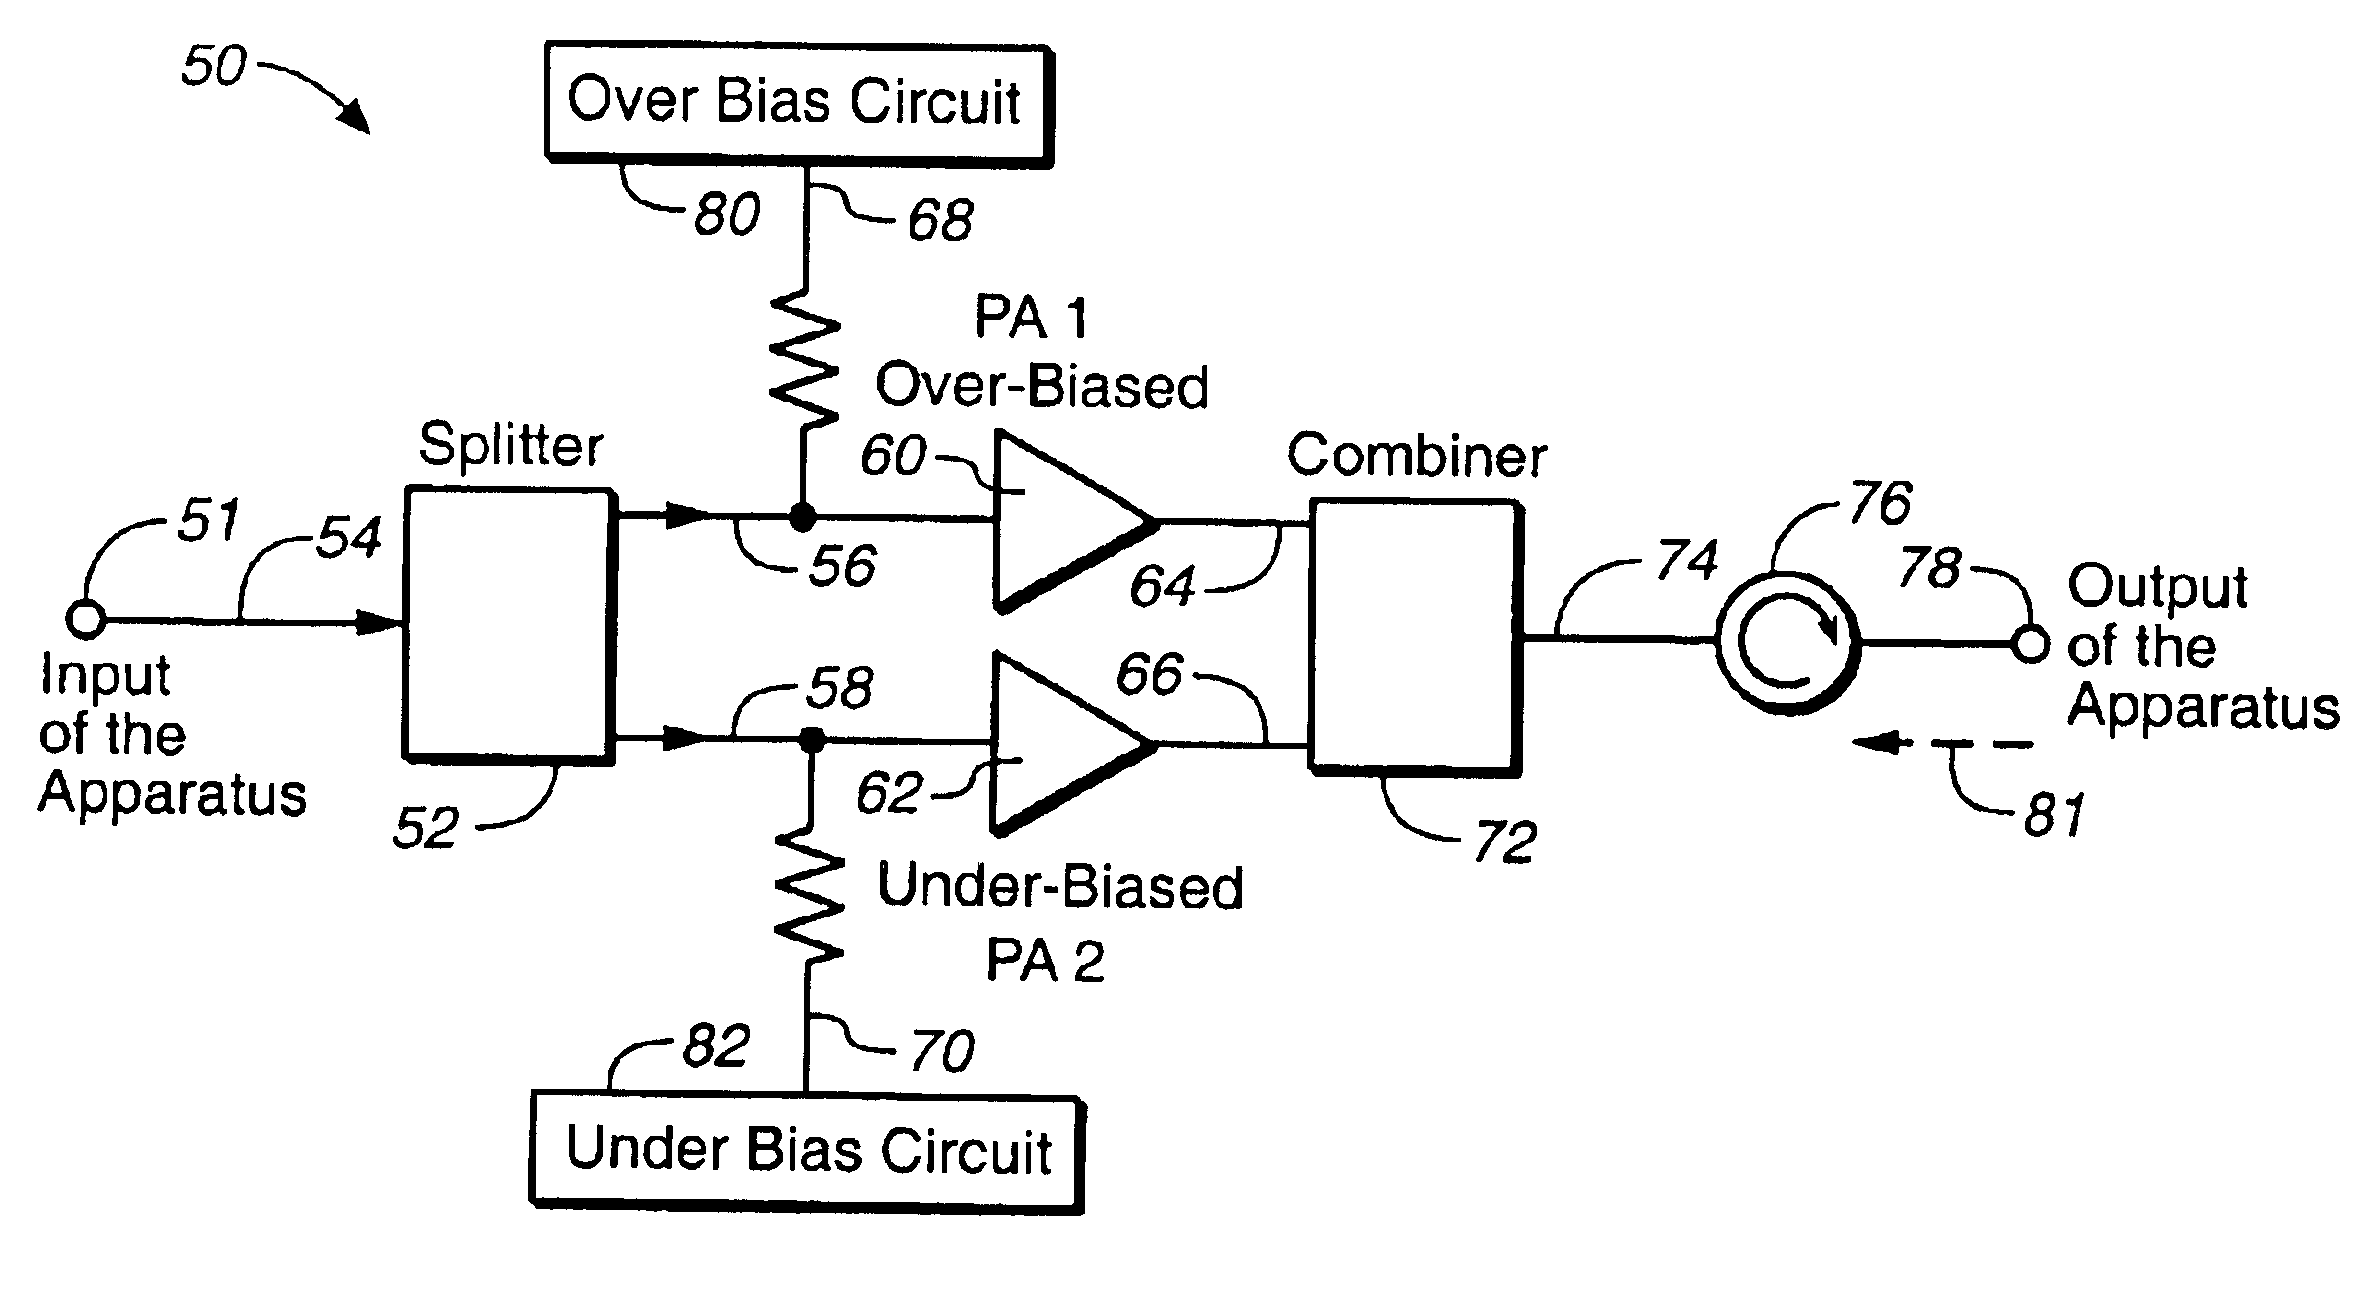 Distortion cancellation for RF amplifiers using complementary biasing circuitry